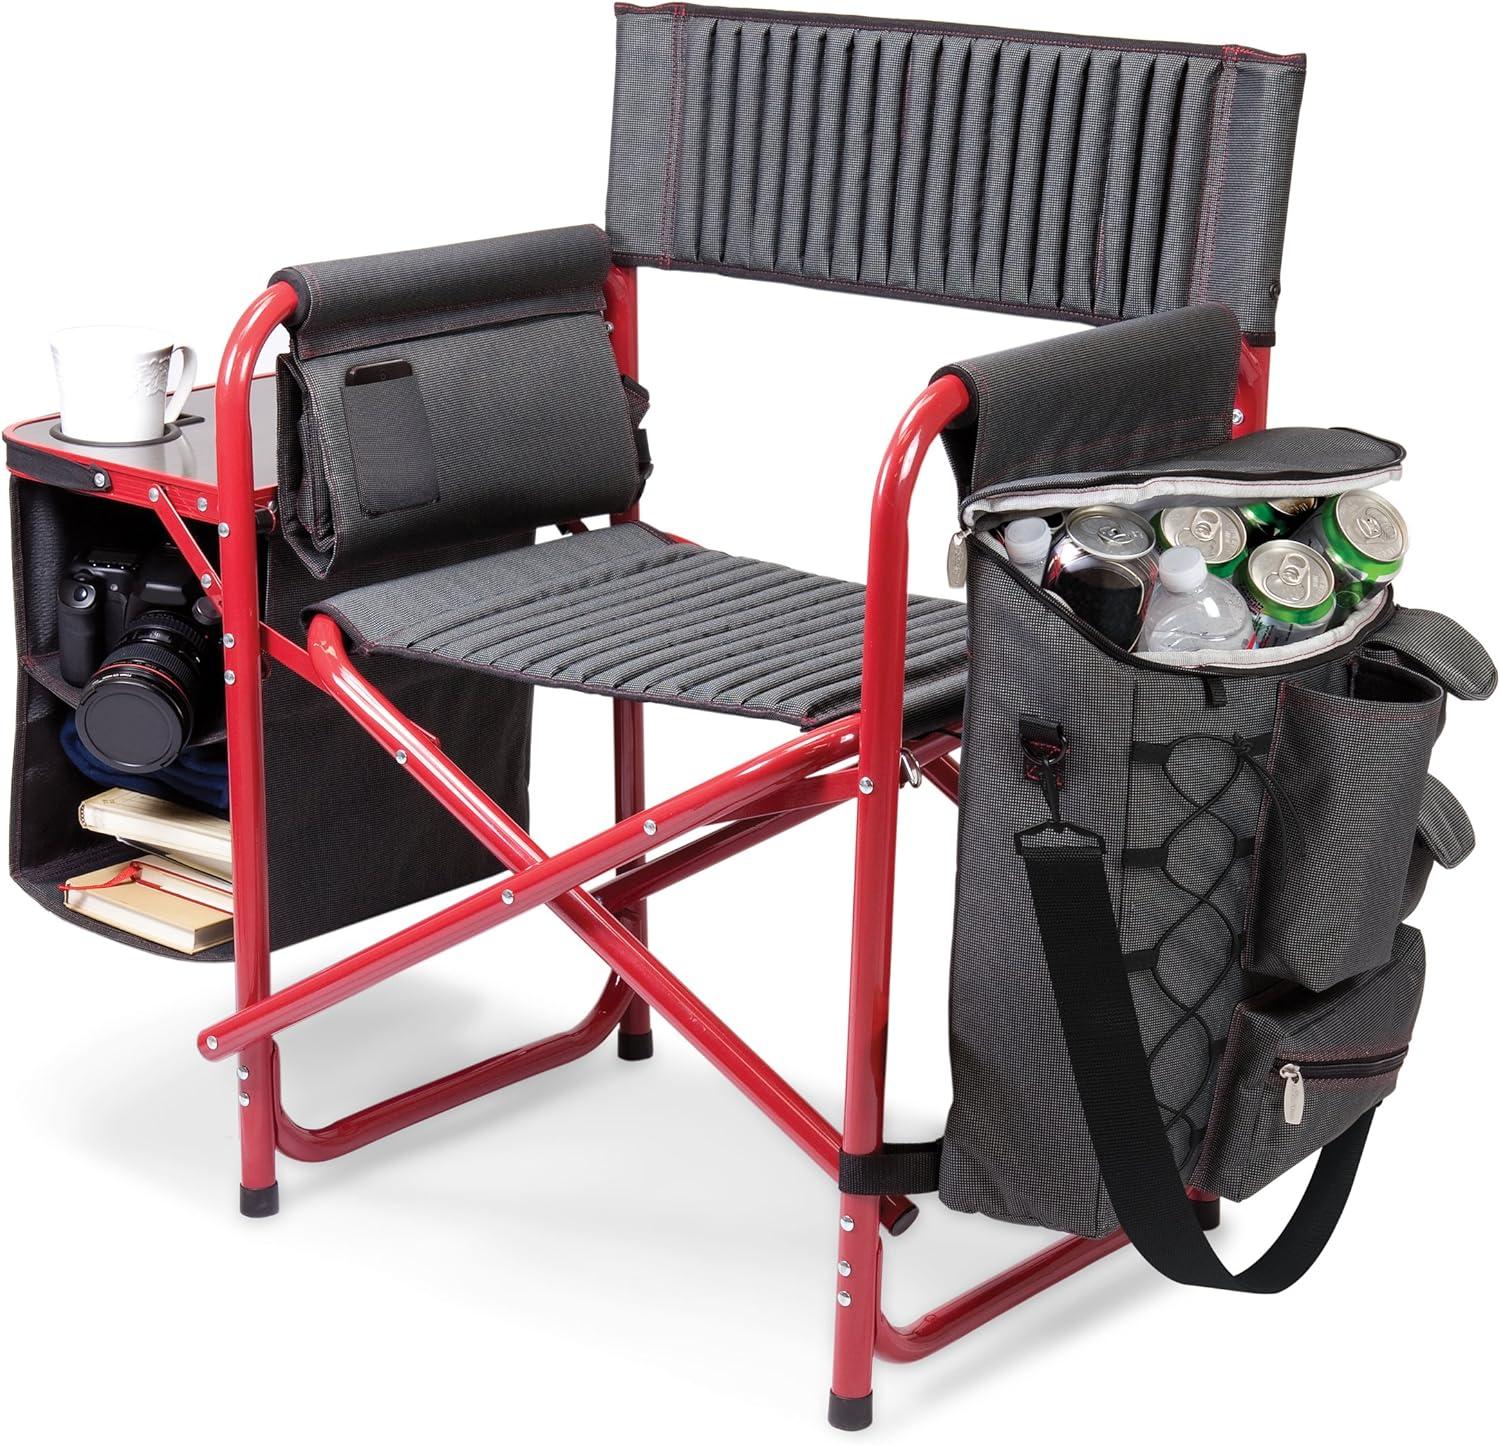 Deluxe Fusion Outdoor Chair with Side Table & Soft Cooler - Beach and Camping Ready